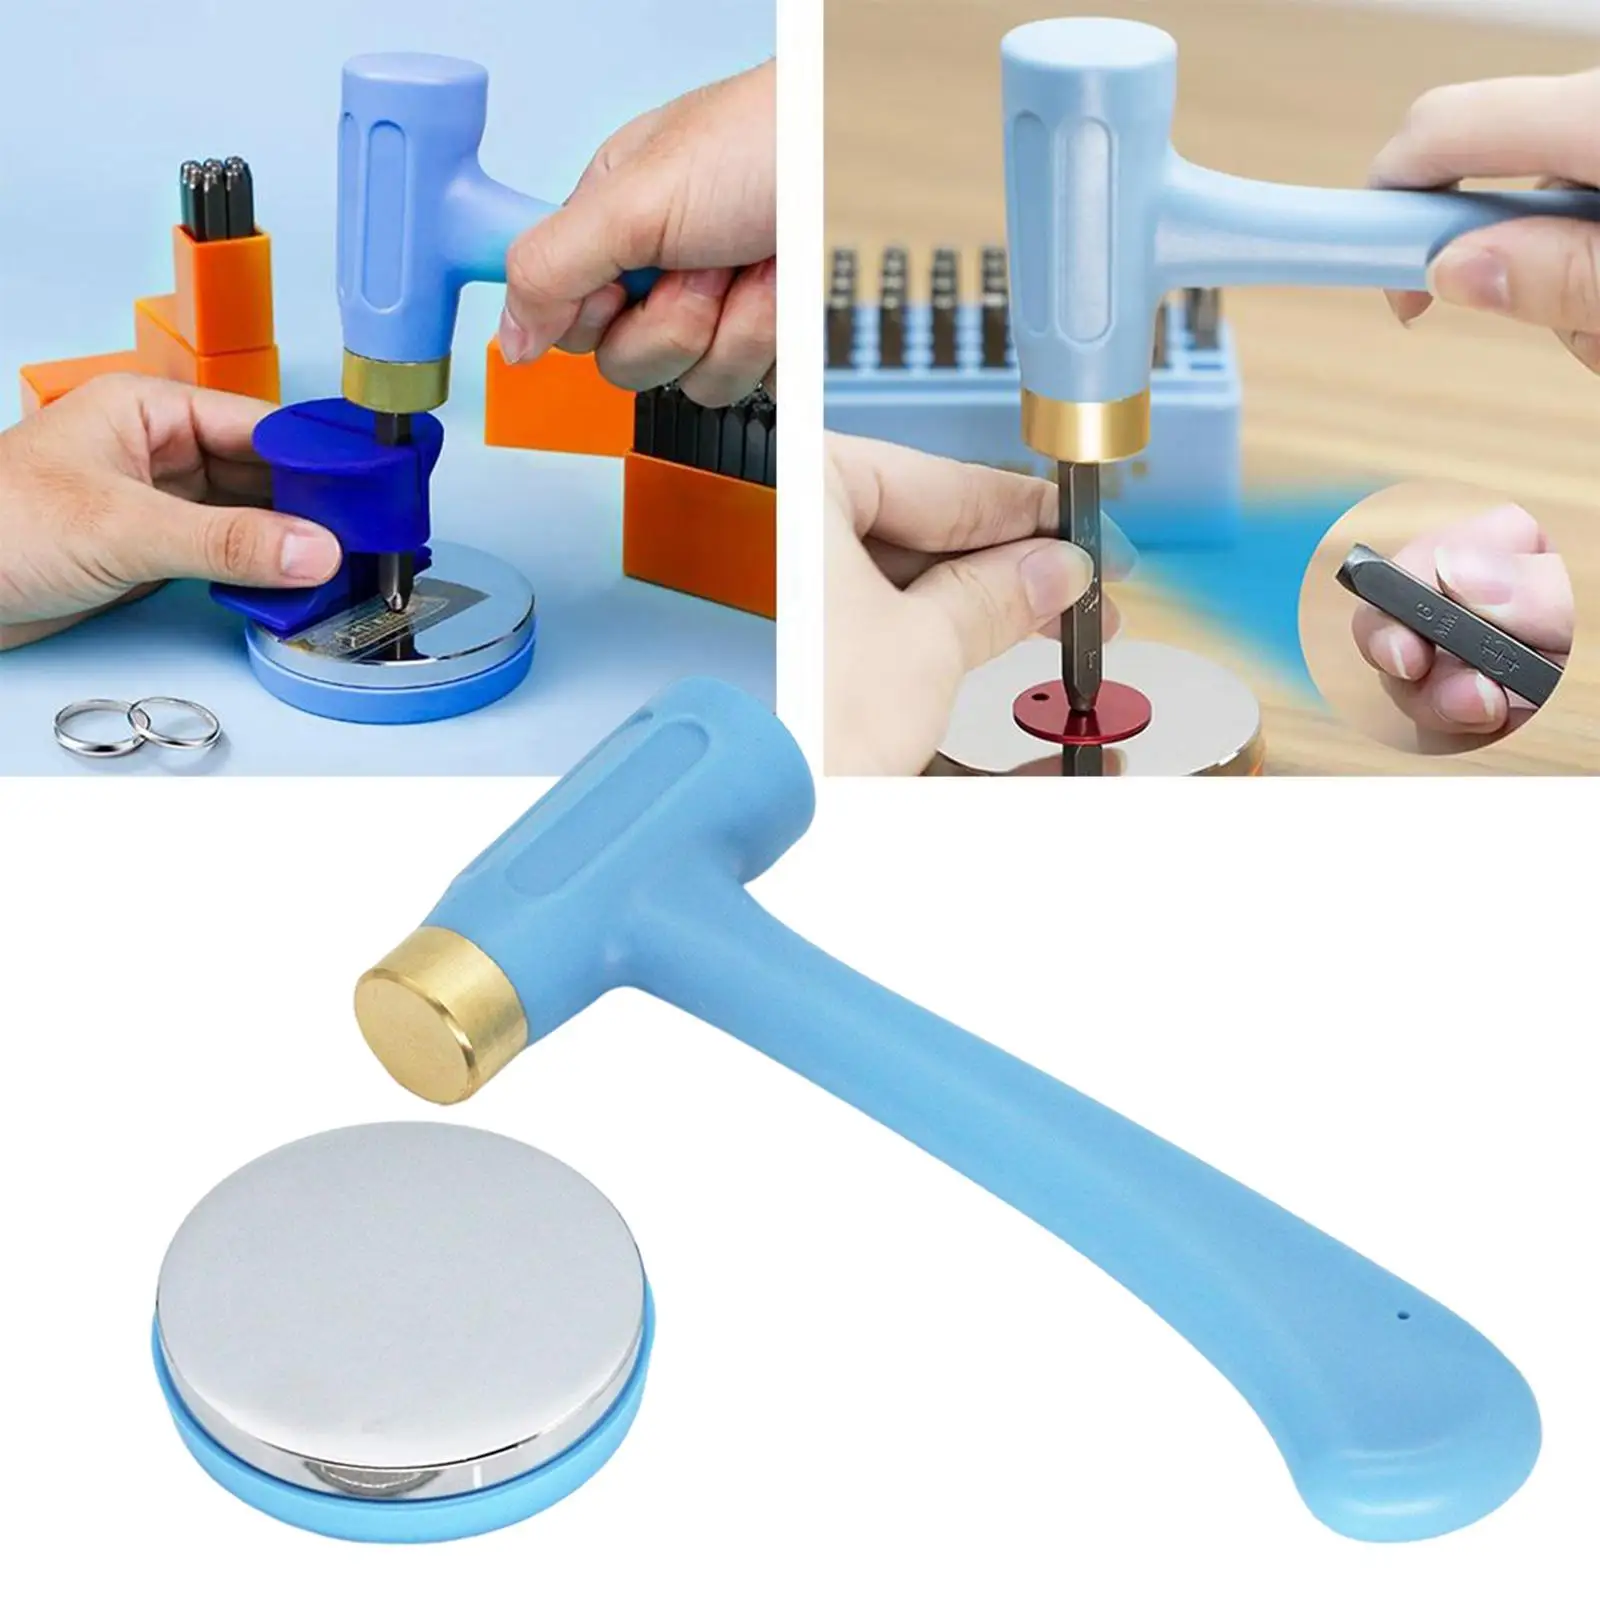 Jewelry Hammer and Bench Block Jewelry Making Supplies Tools Kit for Craft